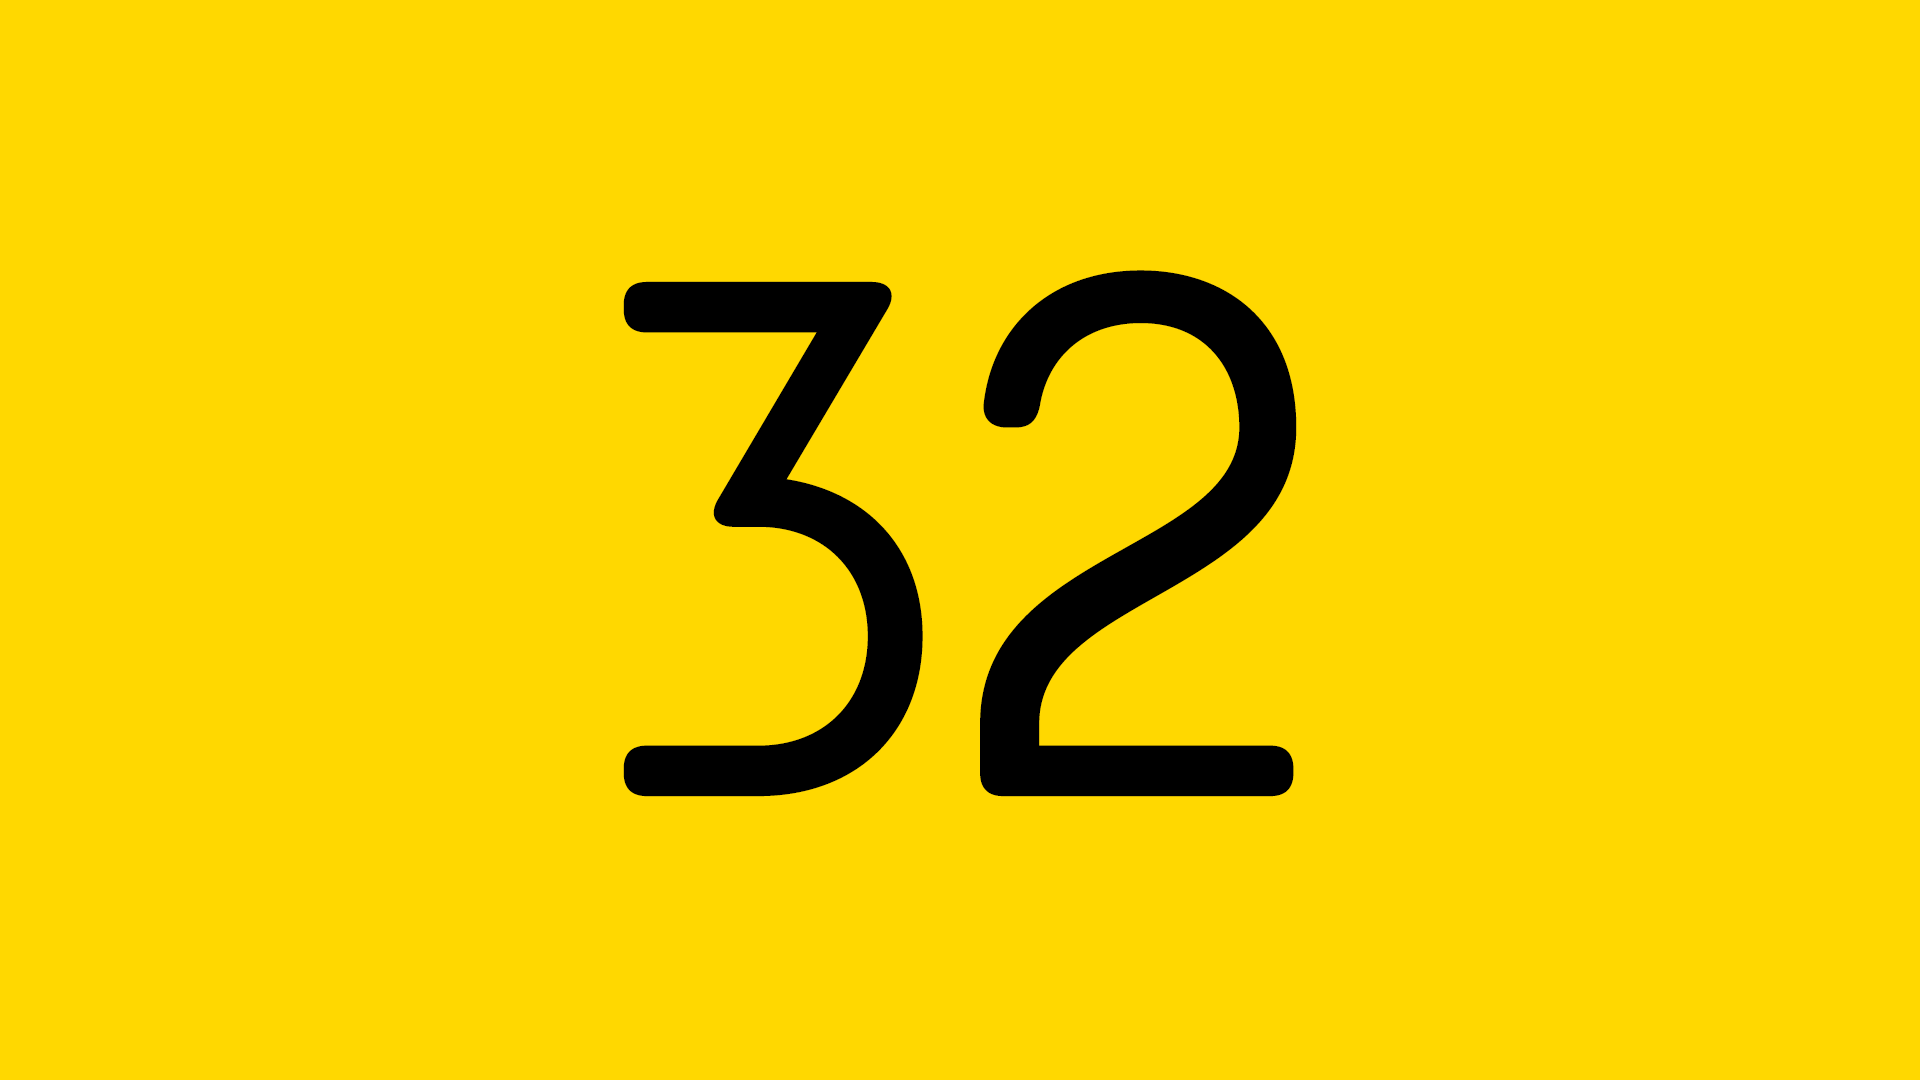 Icon for Level 32